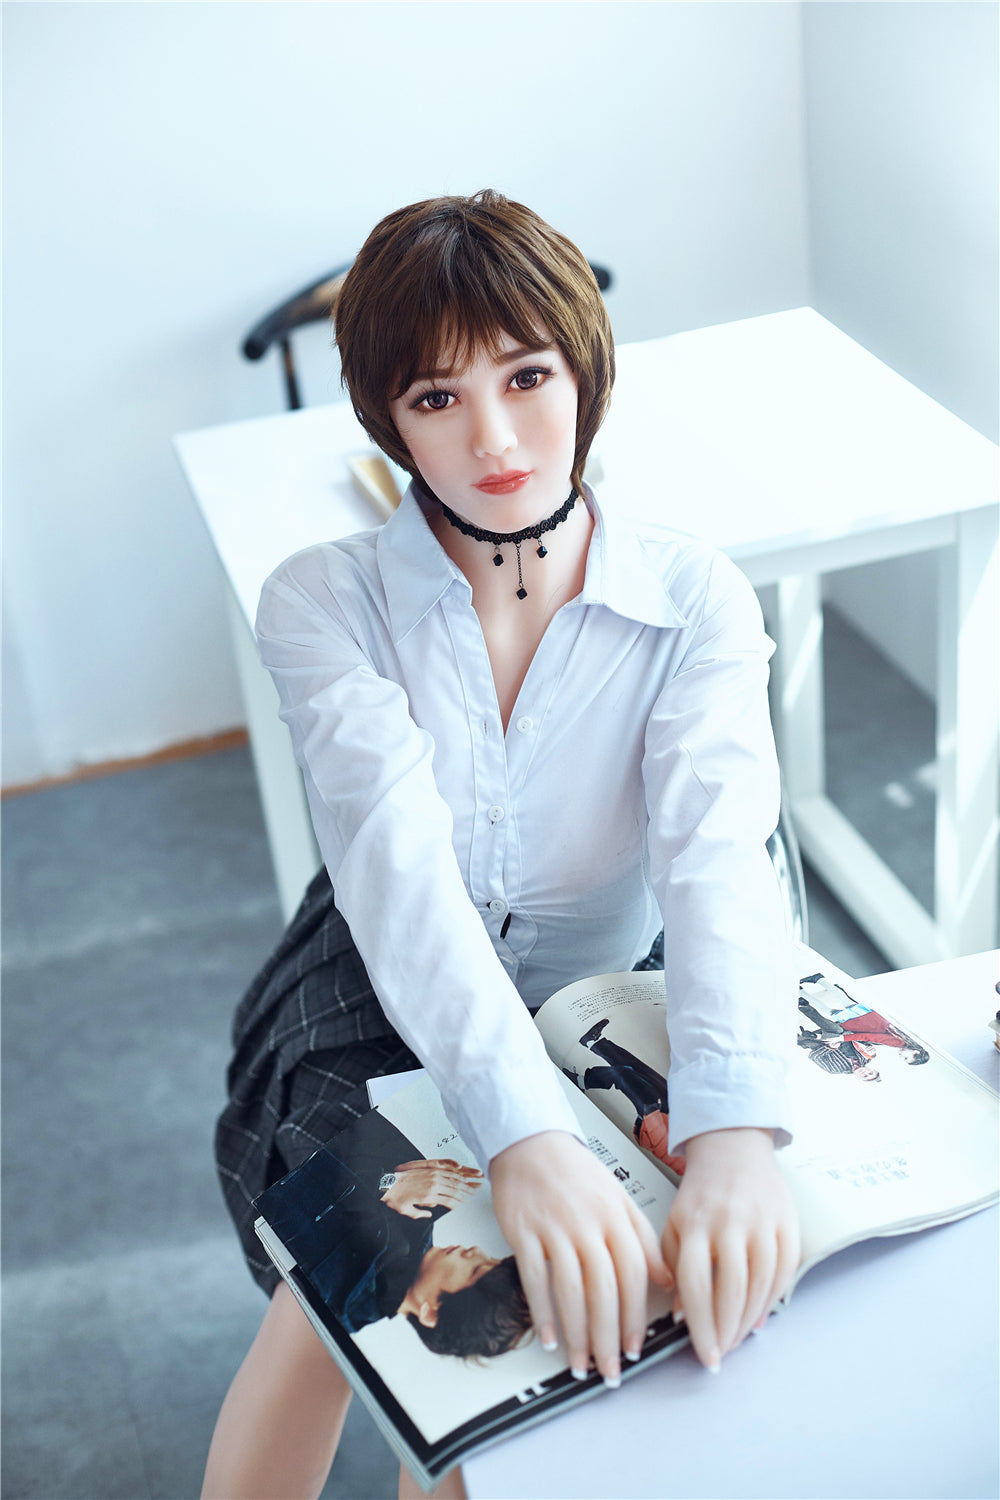 Irontech Doll 159 cm E TPE - Maggie | Buy Sex Dolls at DOLLS ACTUALLY